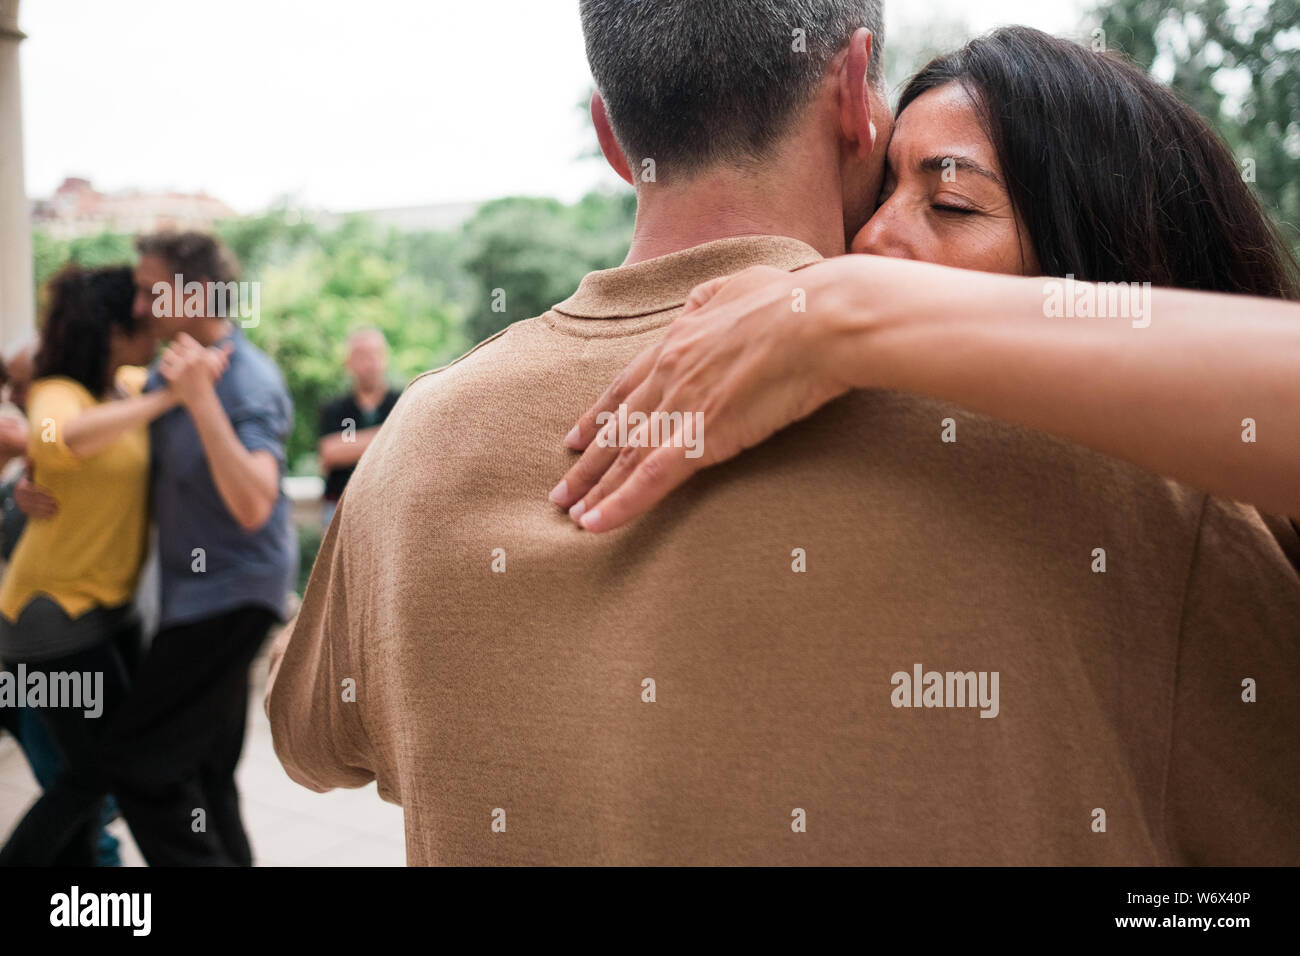 Barcelona, Spain - 10 july 2019: adult couple dancing tango with passion and huggin tight in outdoors park moving close to each other Stock Photo